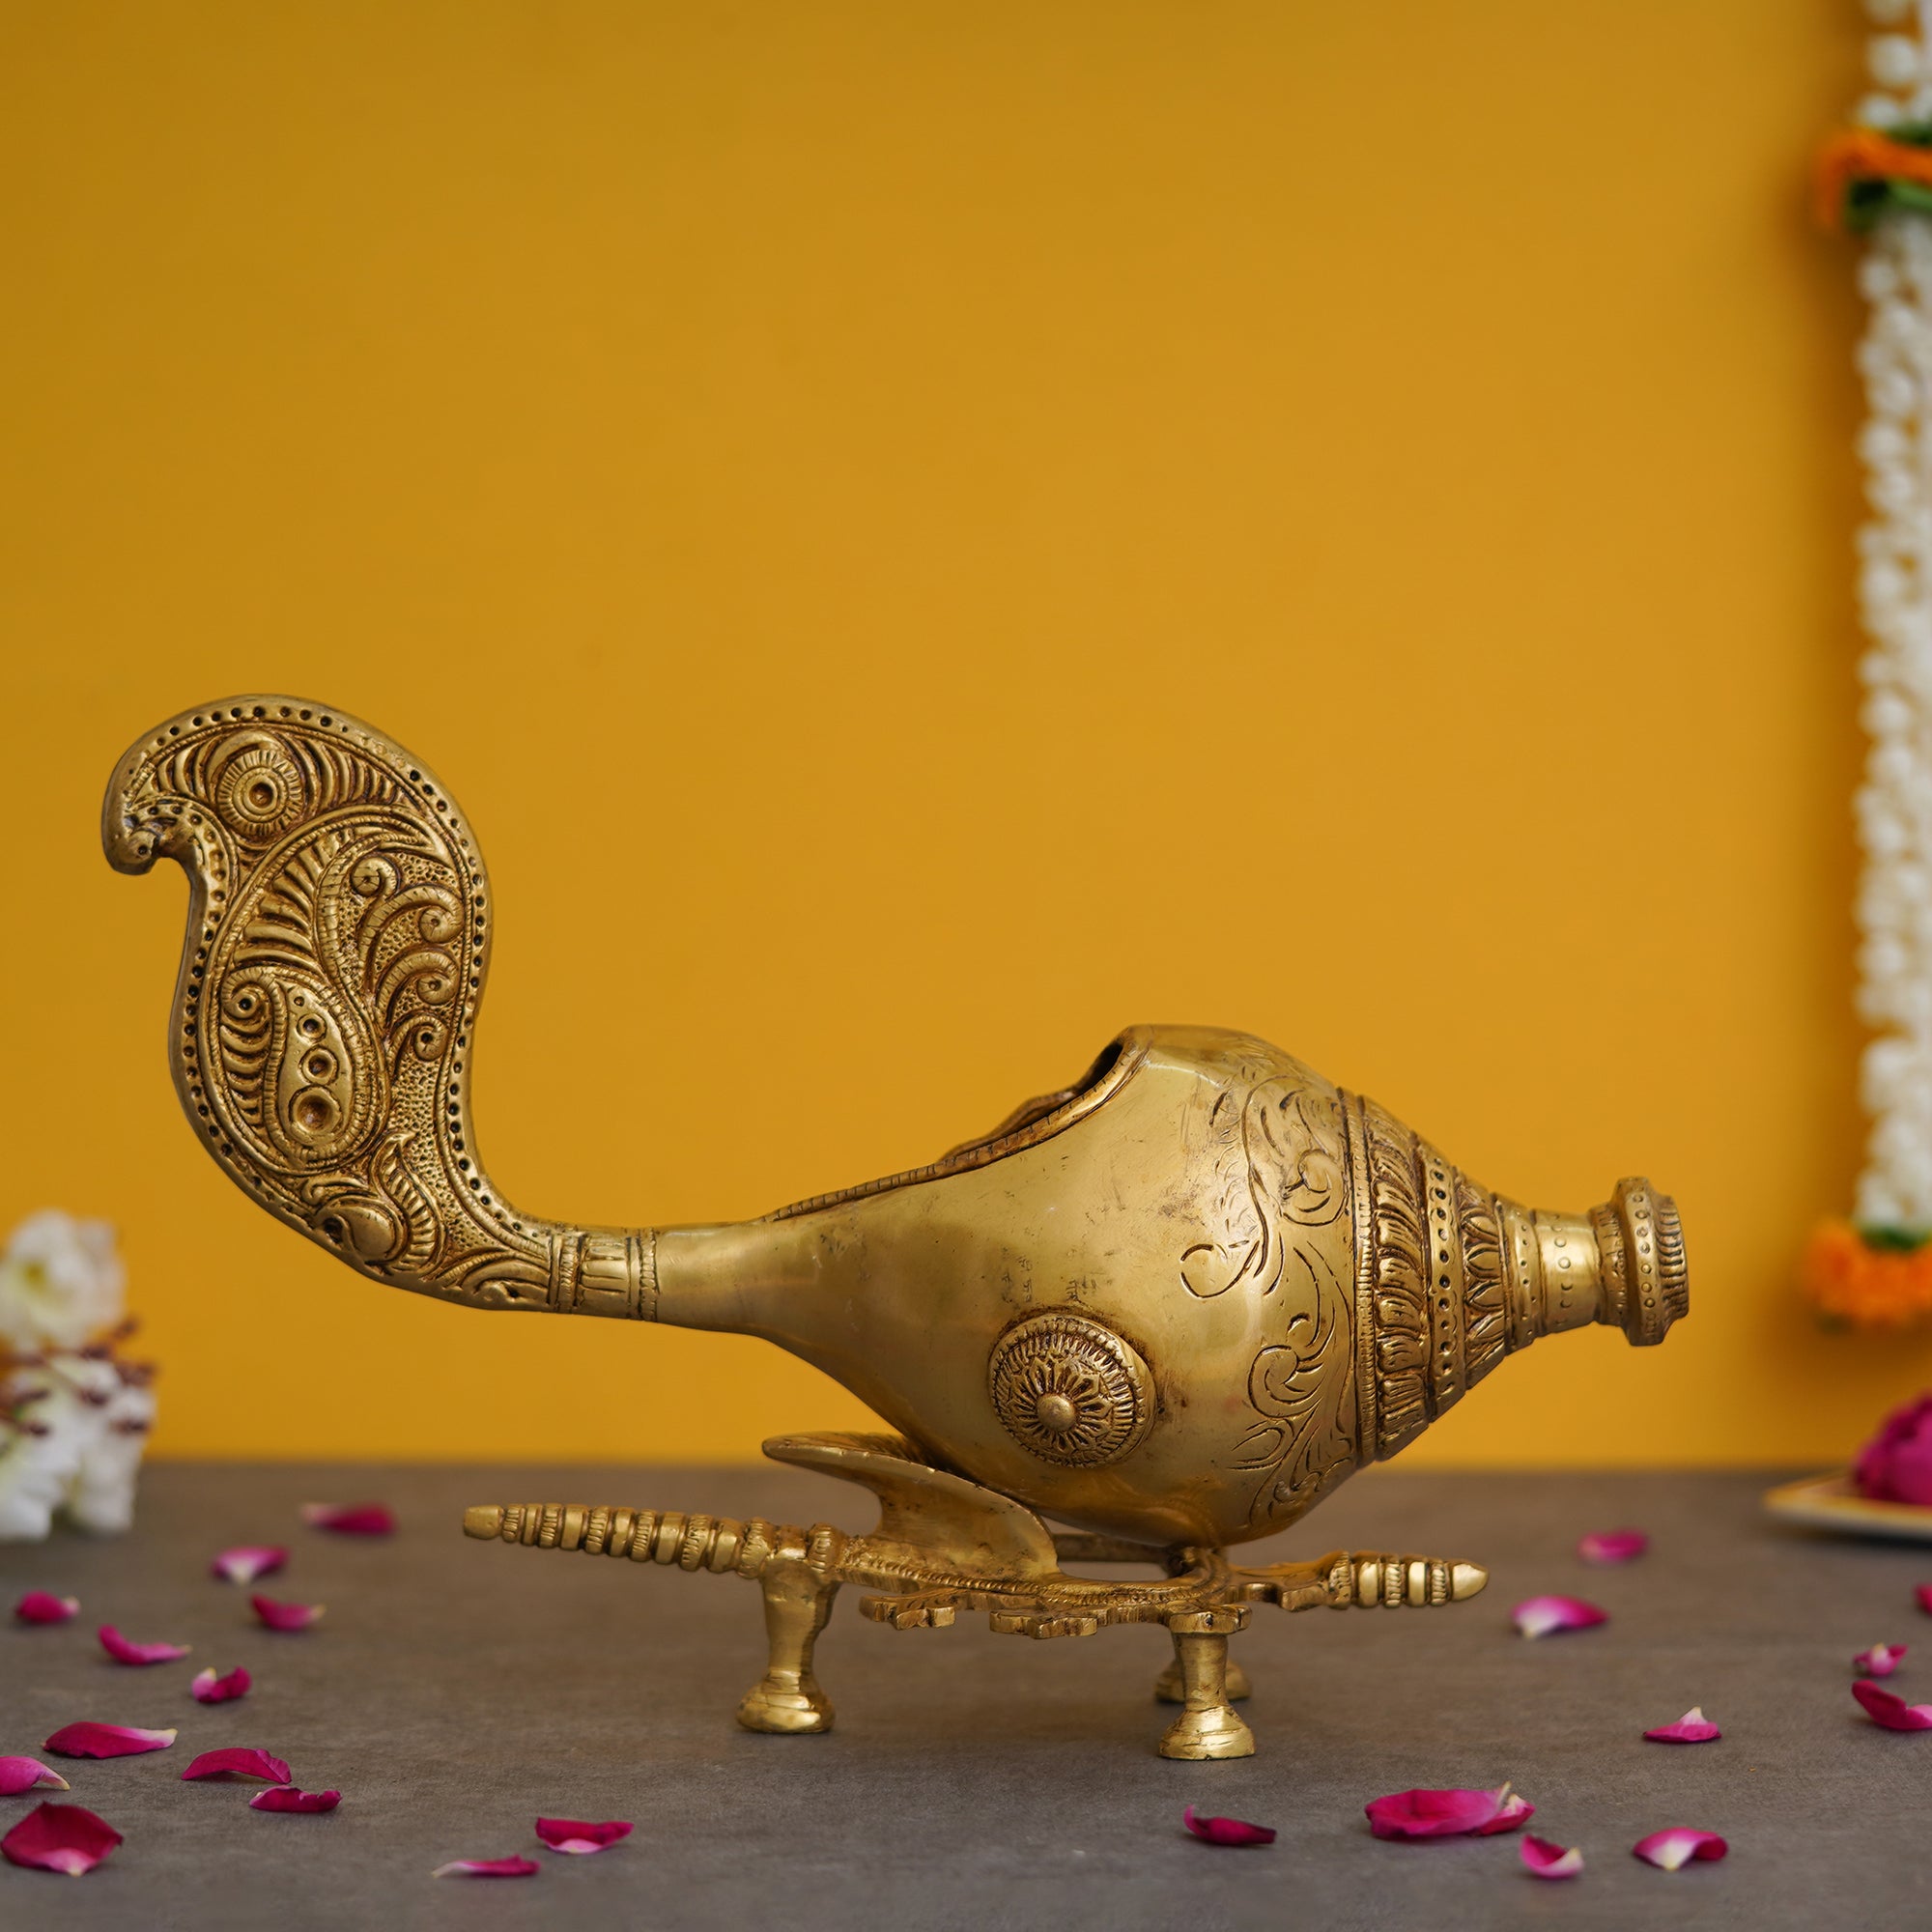 Golden Shankh (Conch) with a Stand Decorative Handcrafted Brass Showpiece 5